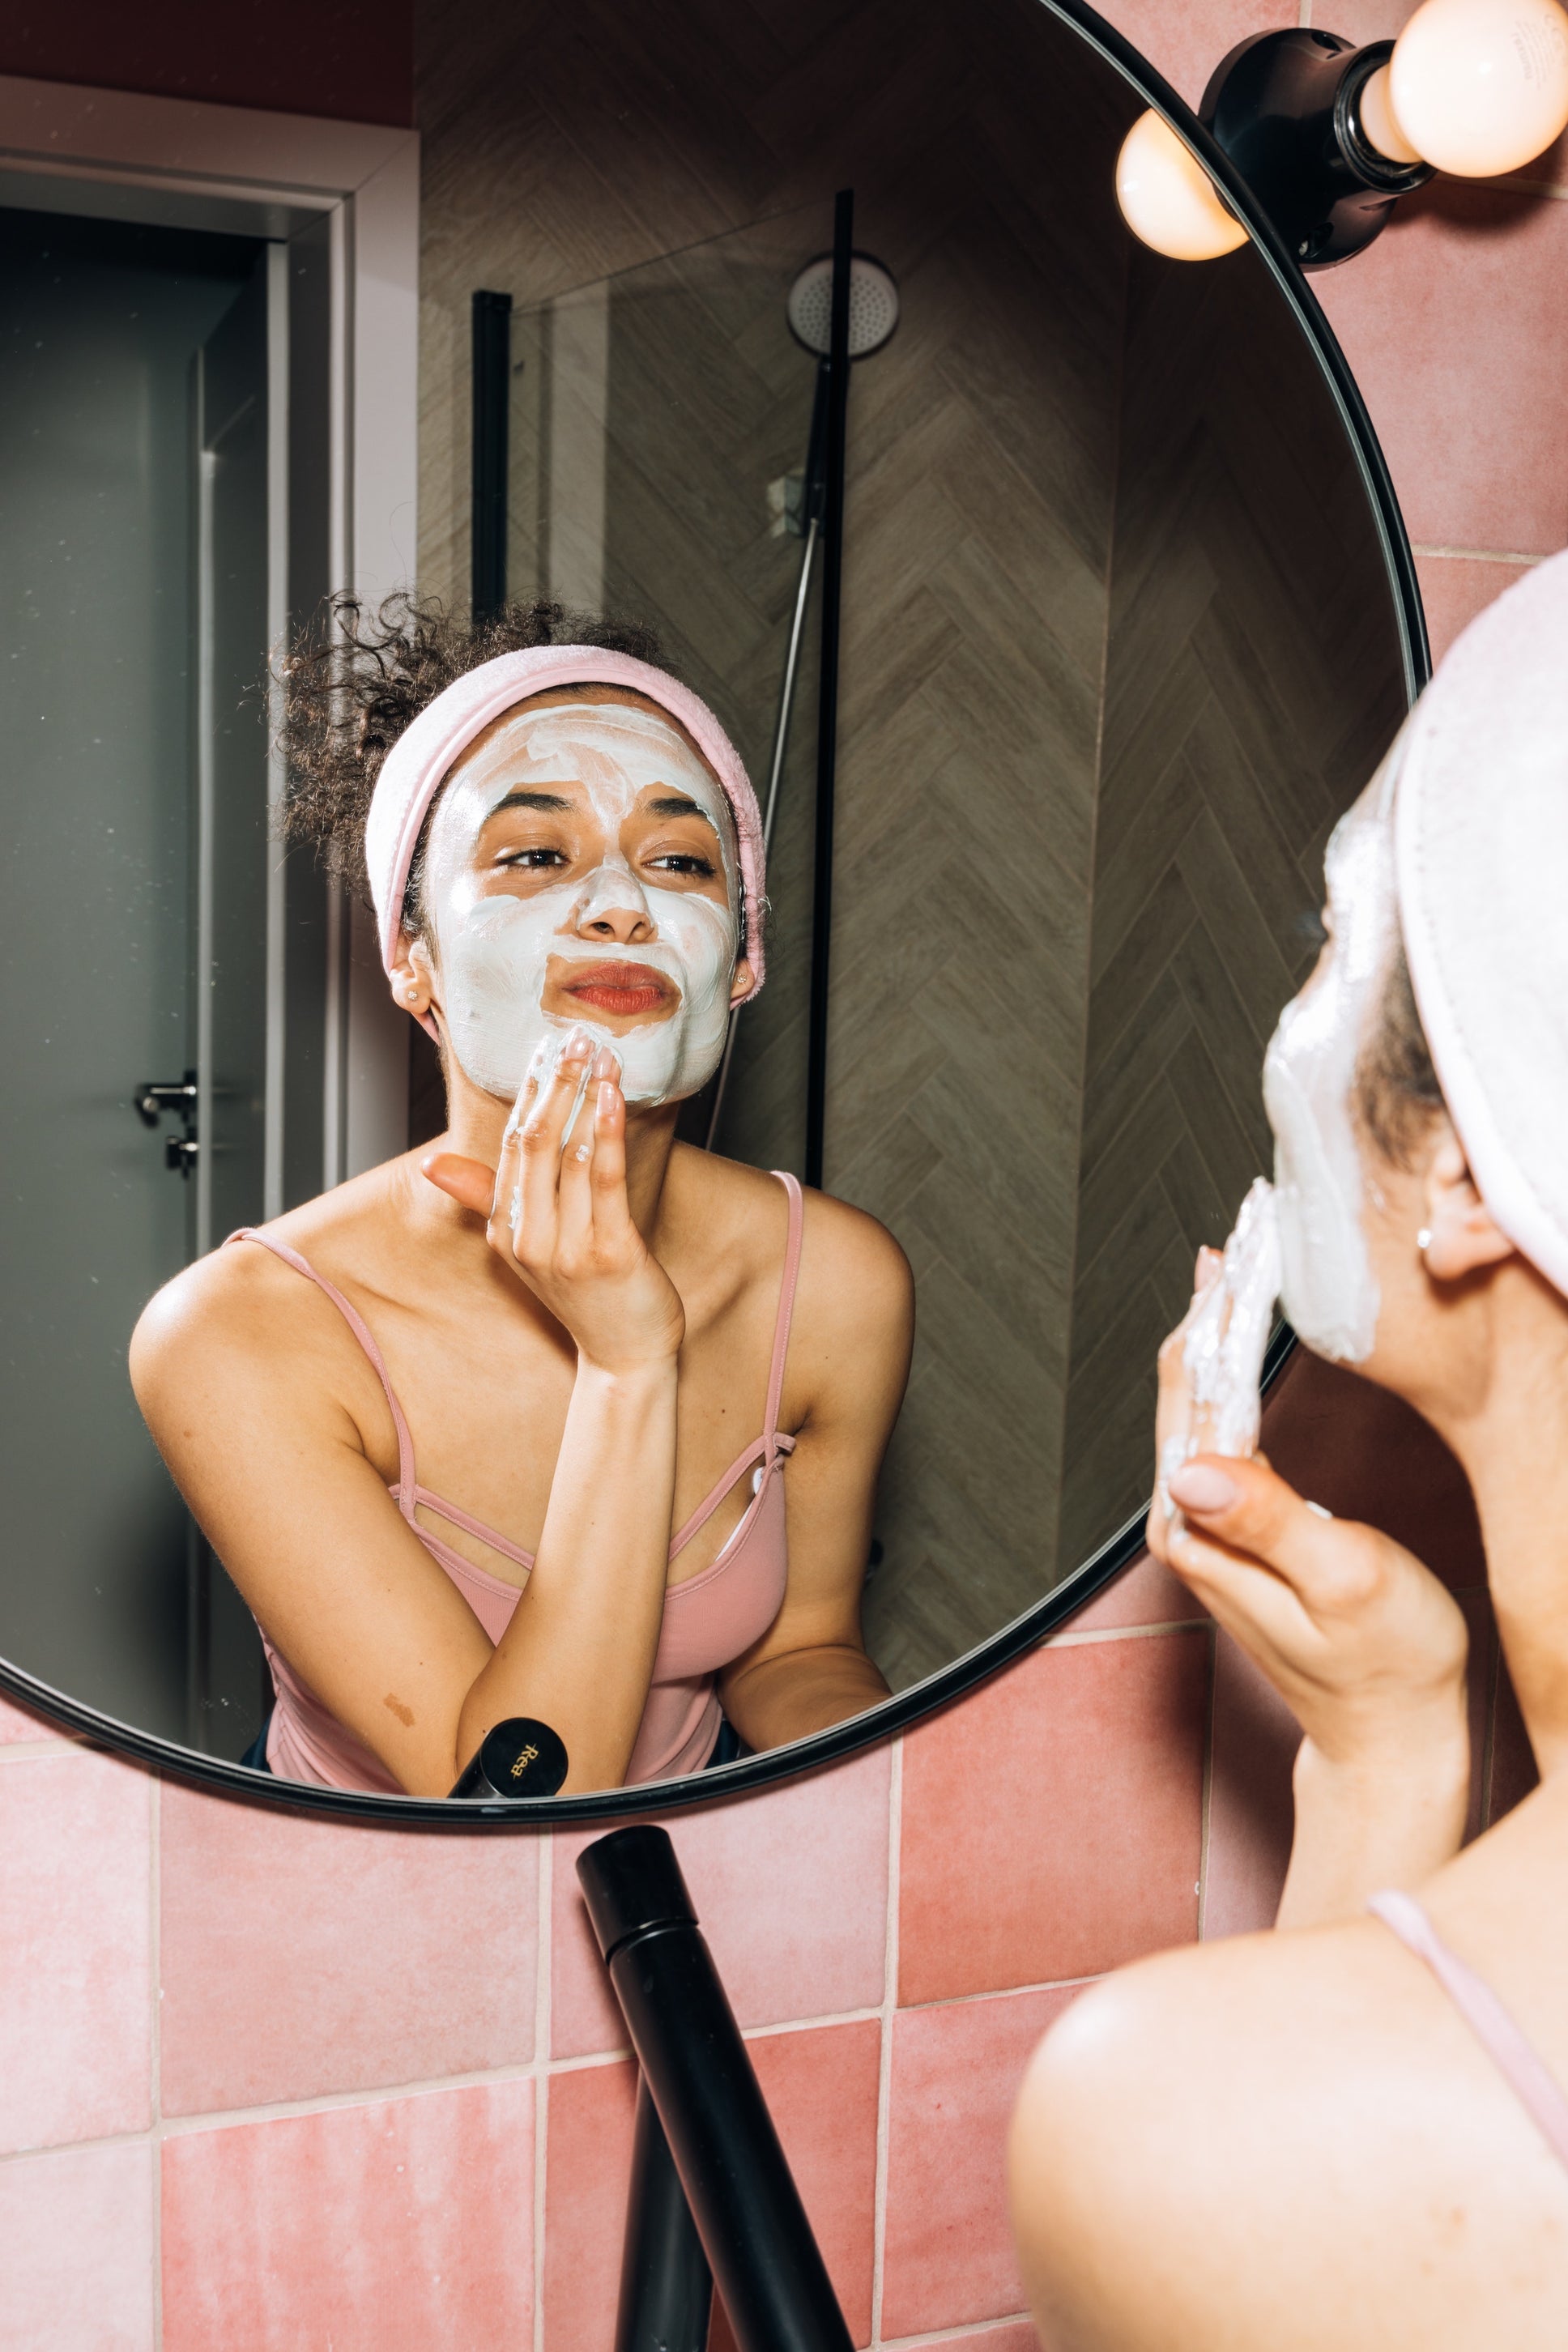 3 basic skincare tips to keep your complexion and body happy and healthy all year!